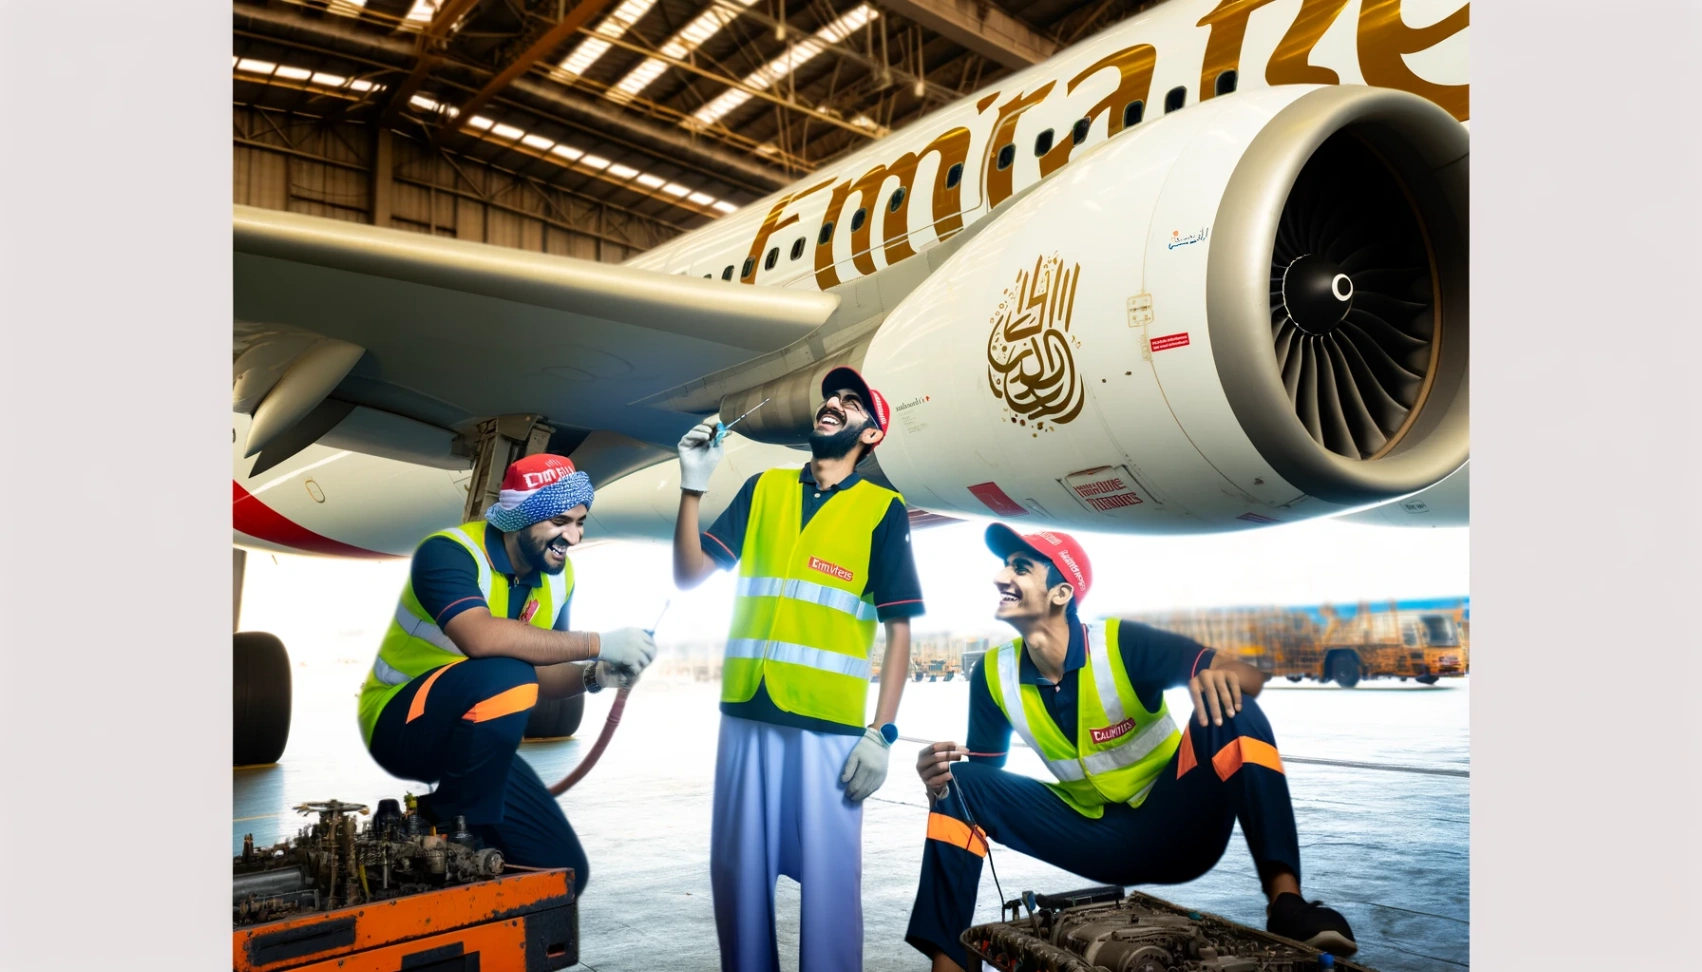 Job Openings at Emirates Airlines: Learn How to Apply